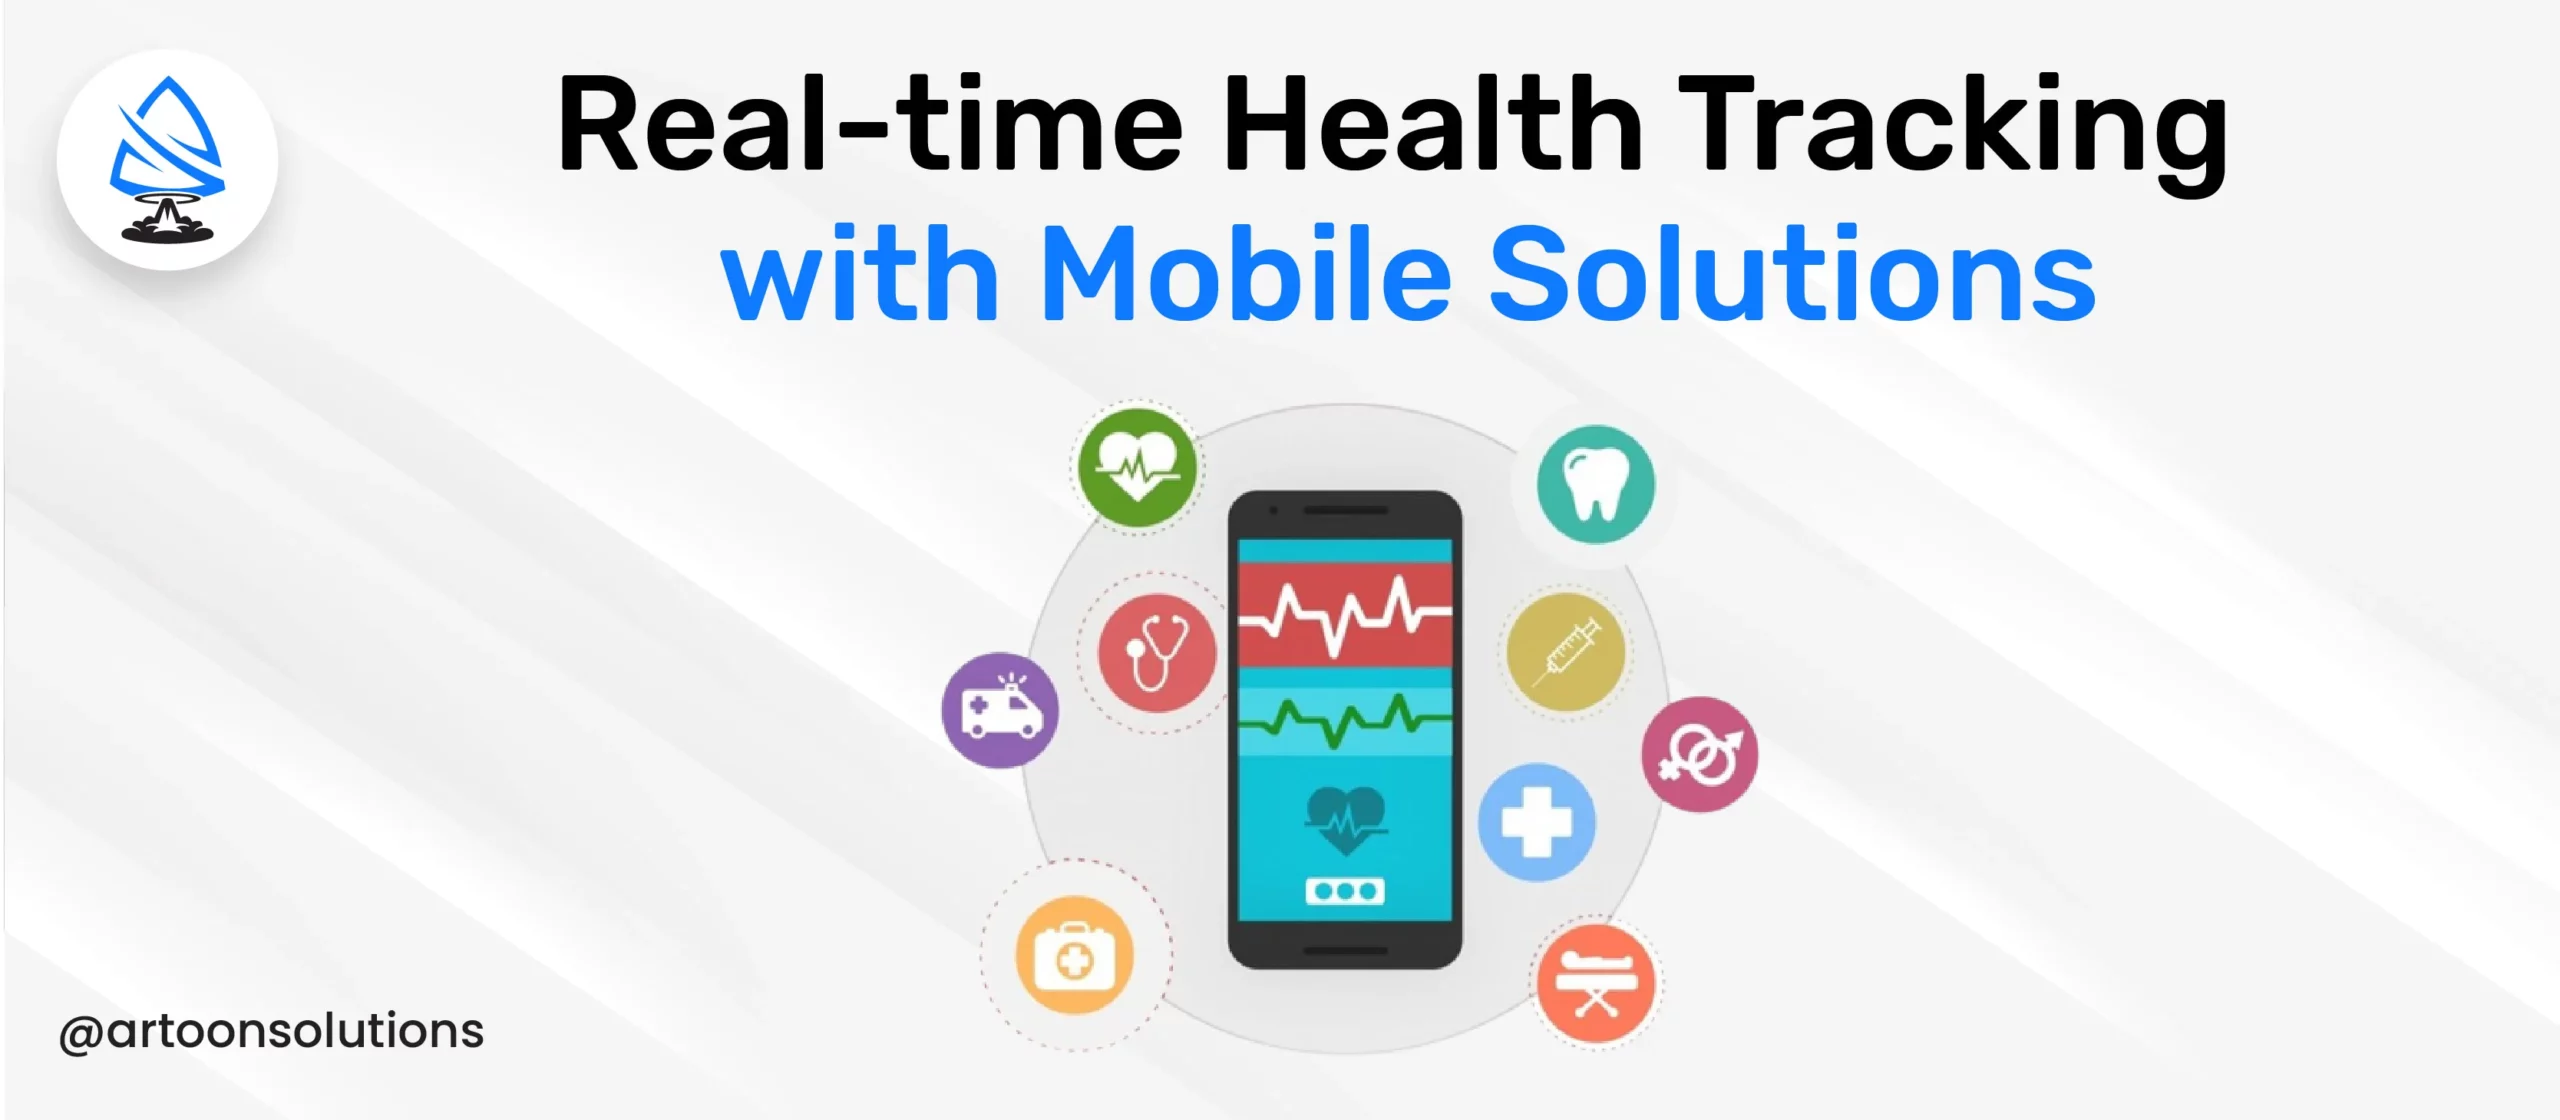 Real-time Health Tracking with Mobile Solutions